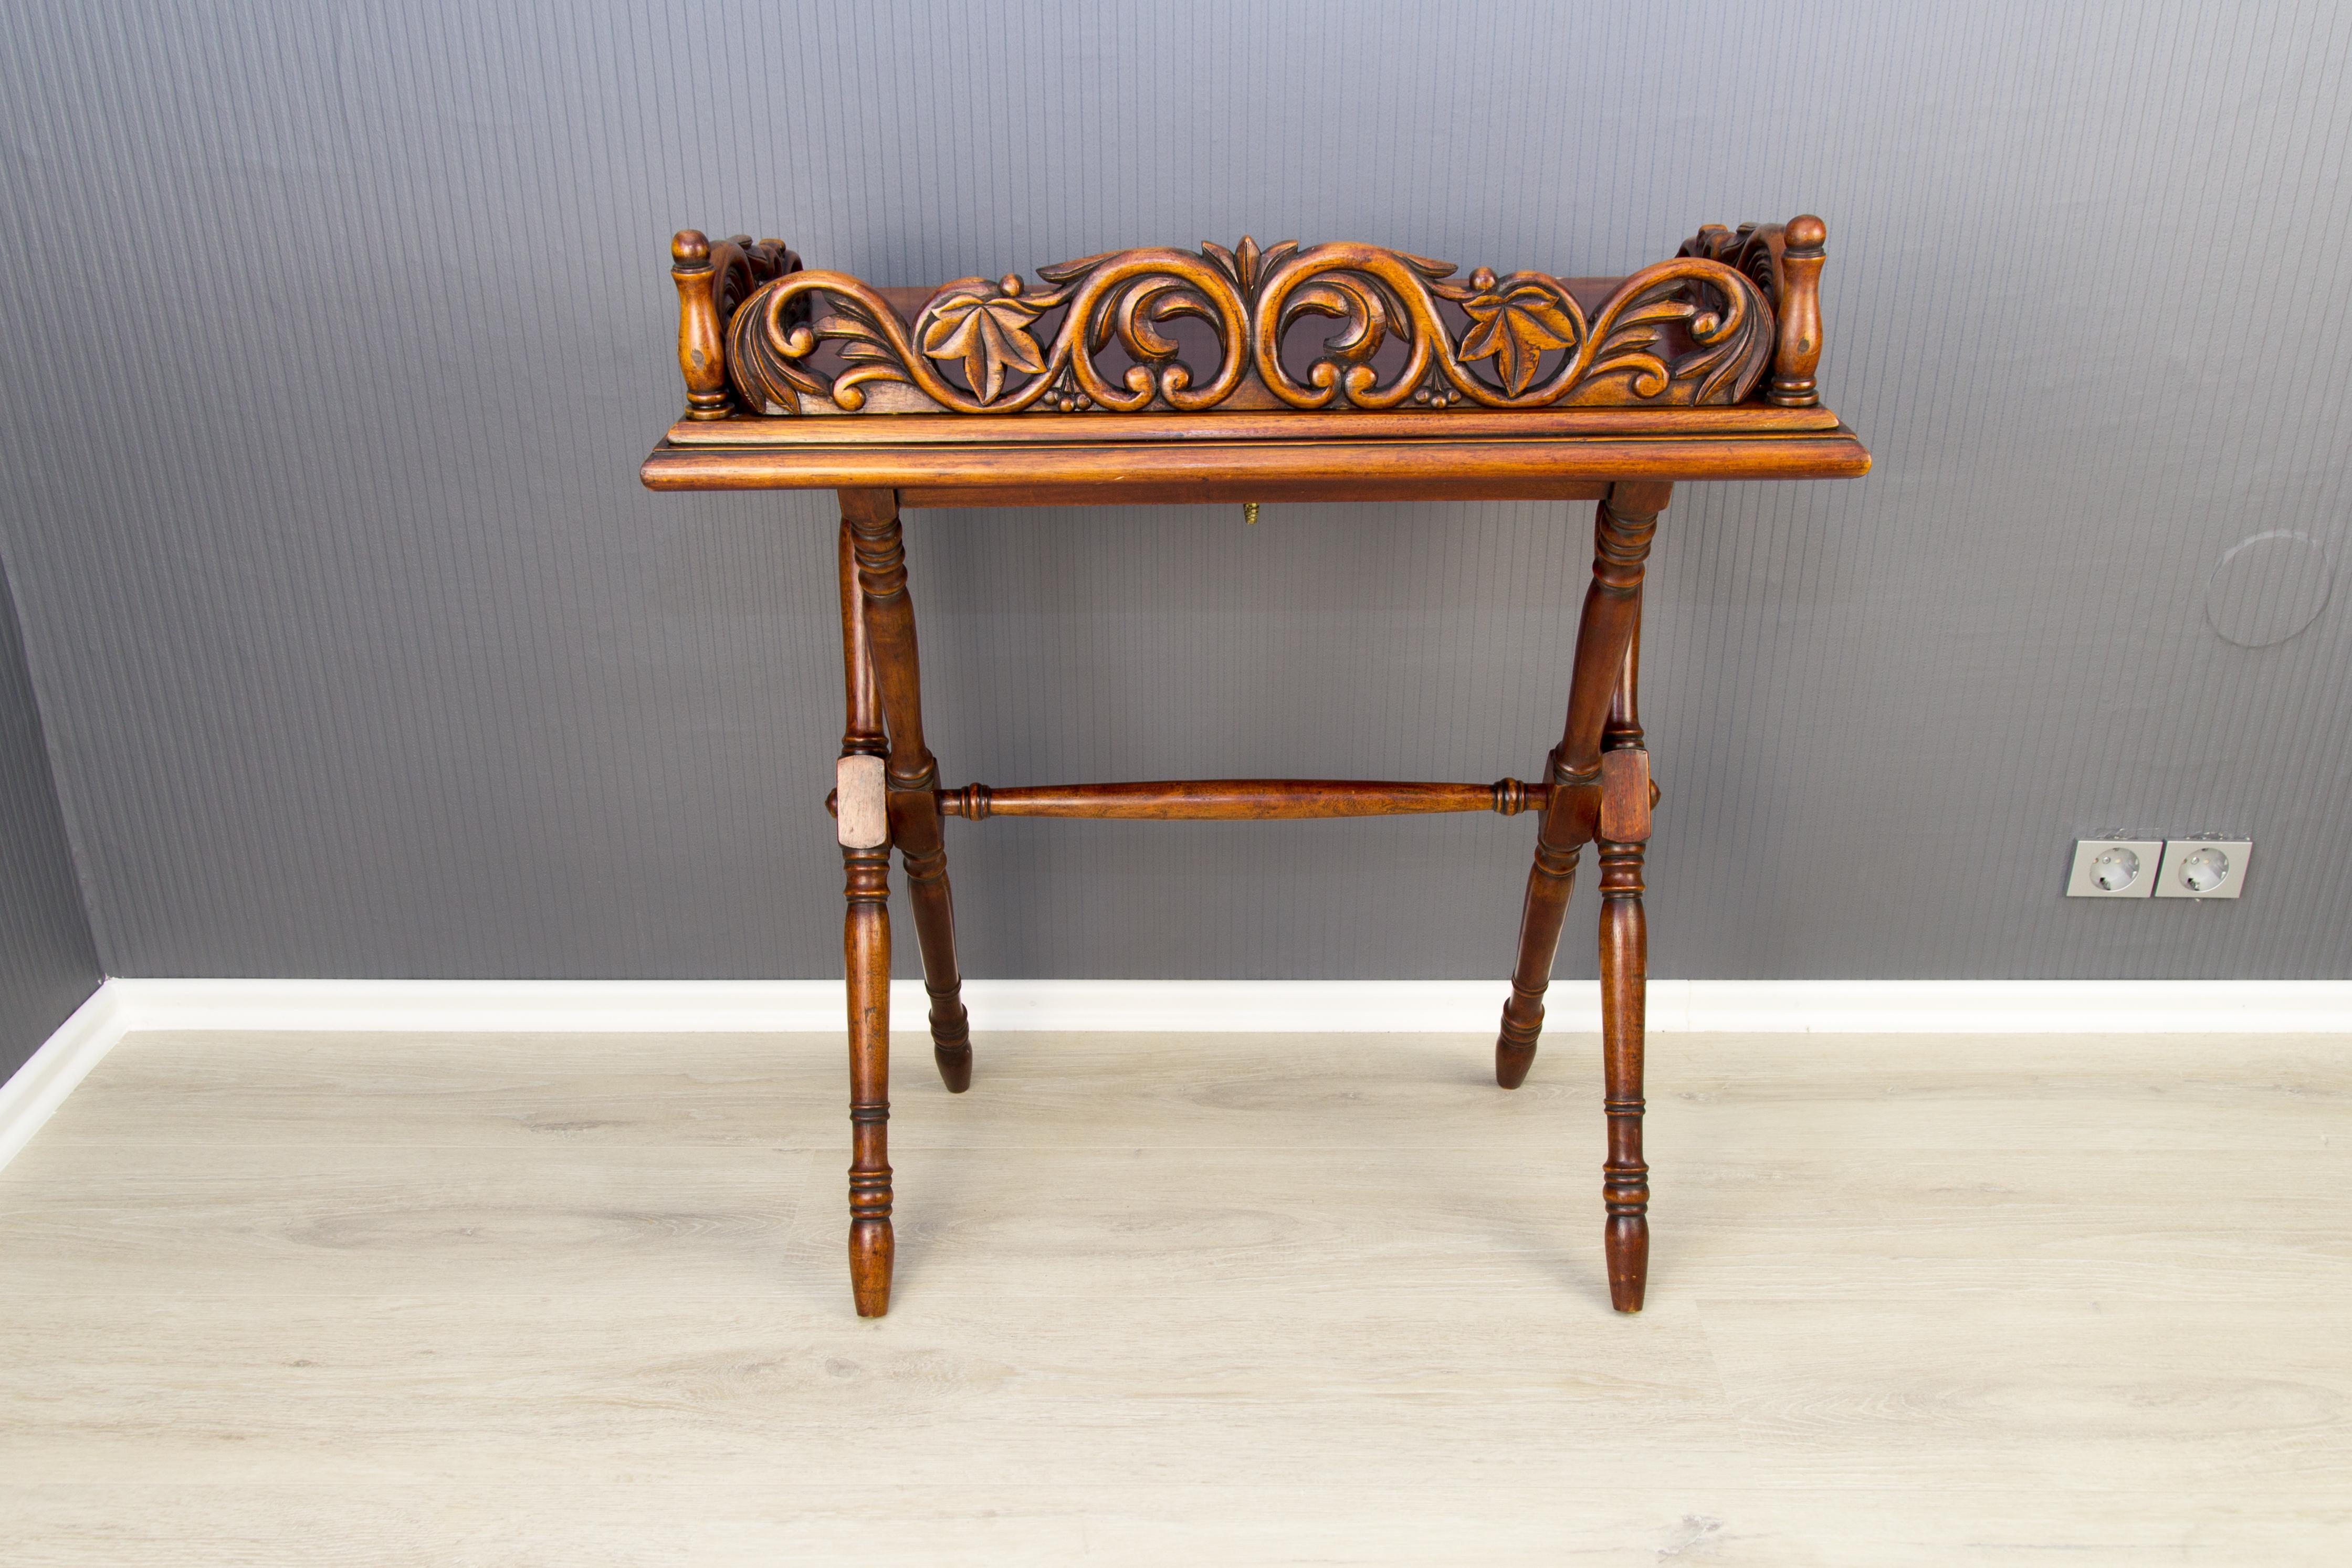 Victorian Style Ornate Carved Walnut Folding Table, circa 1920 For Sale 1